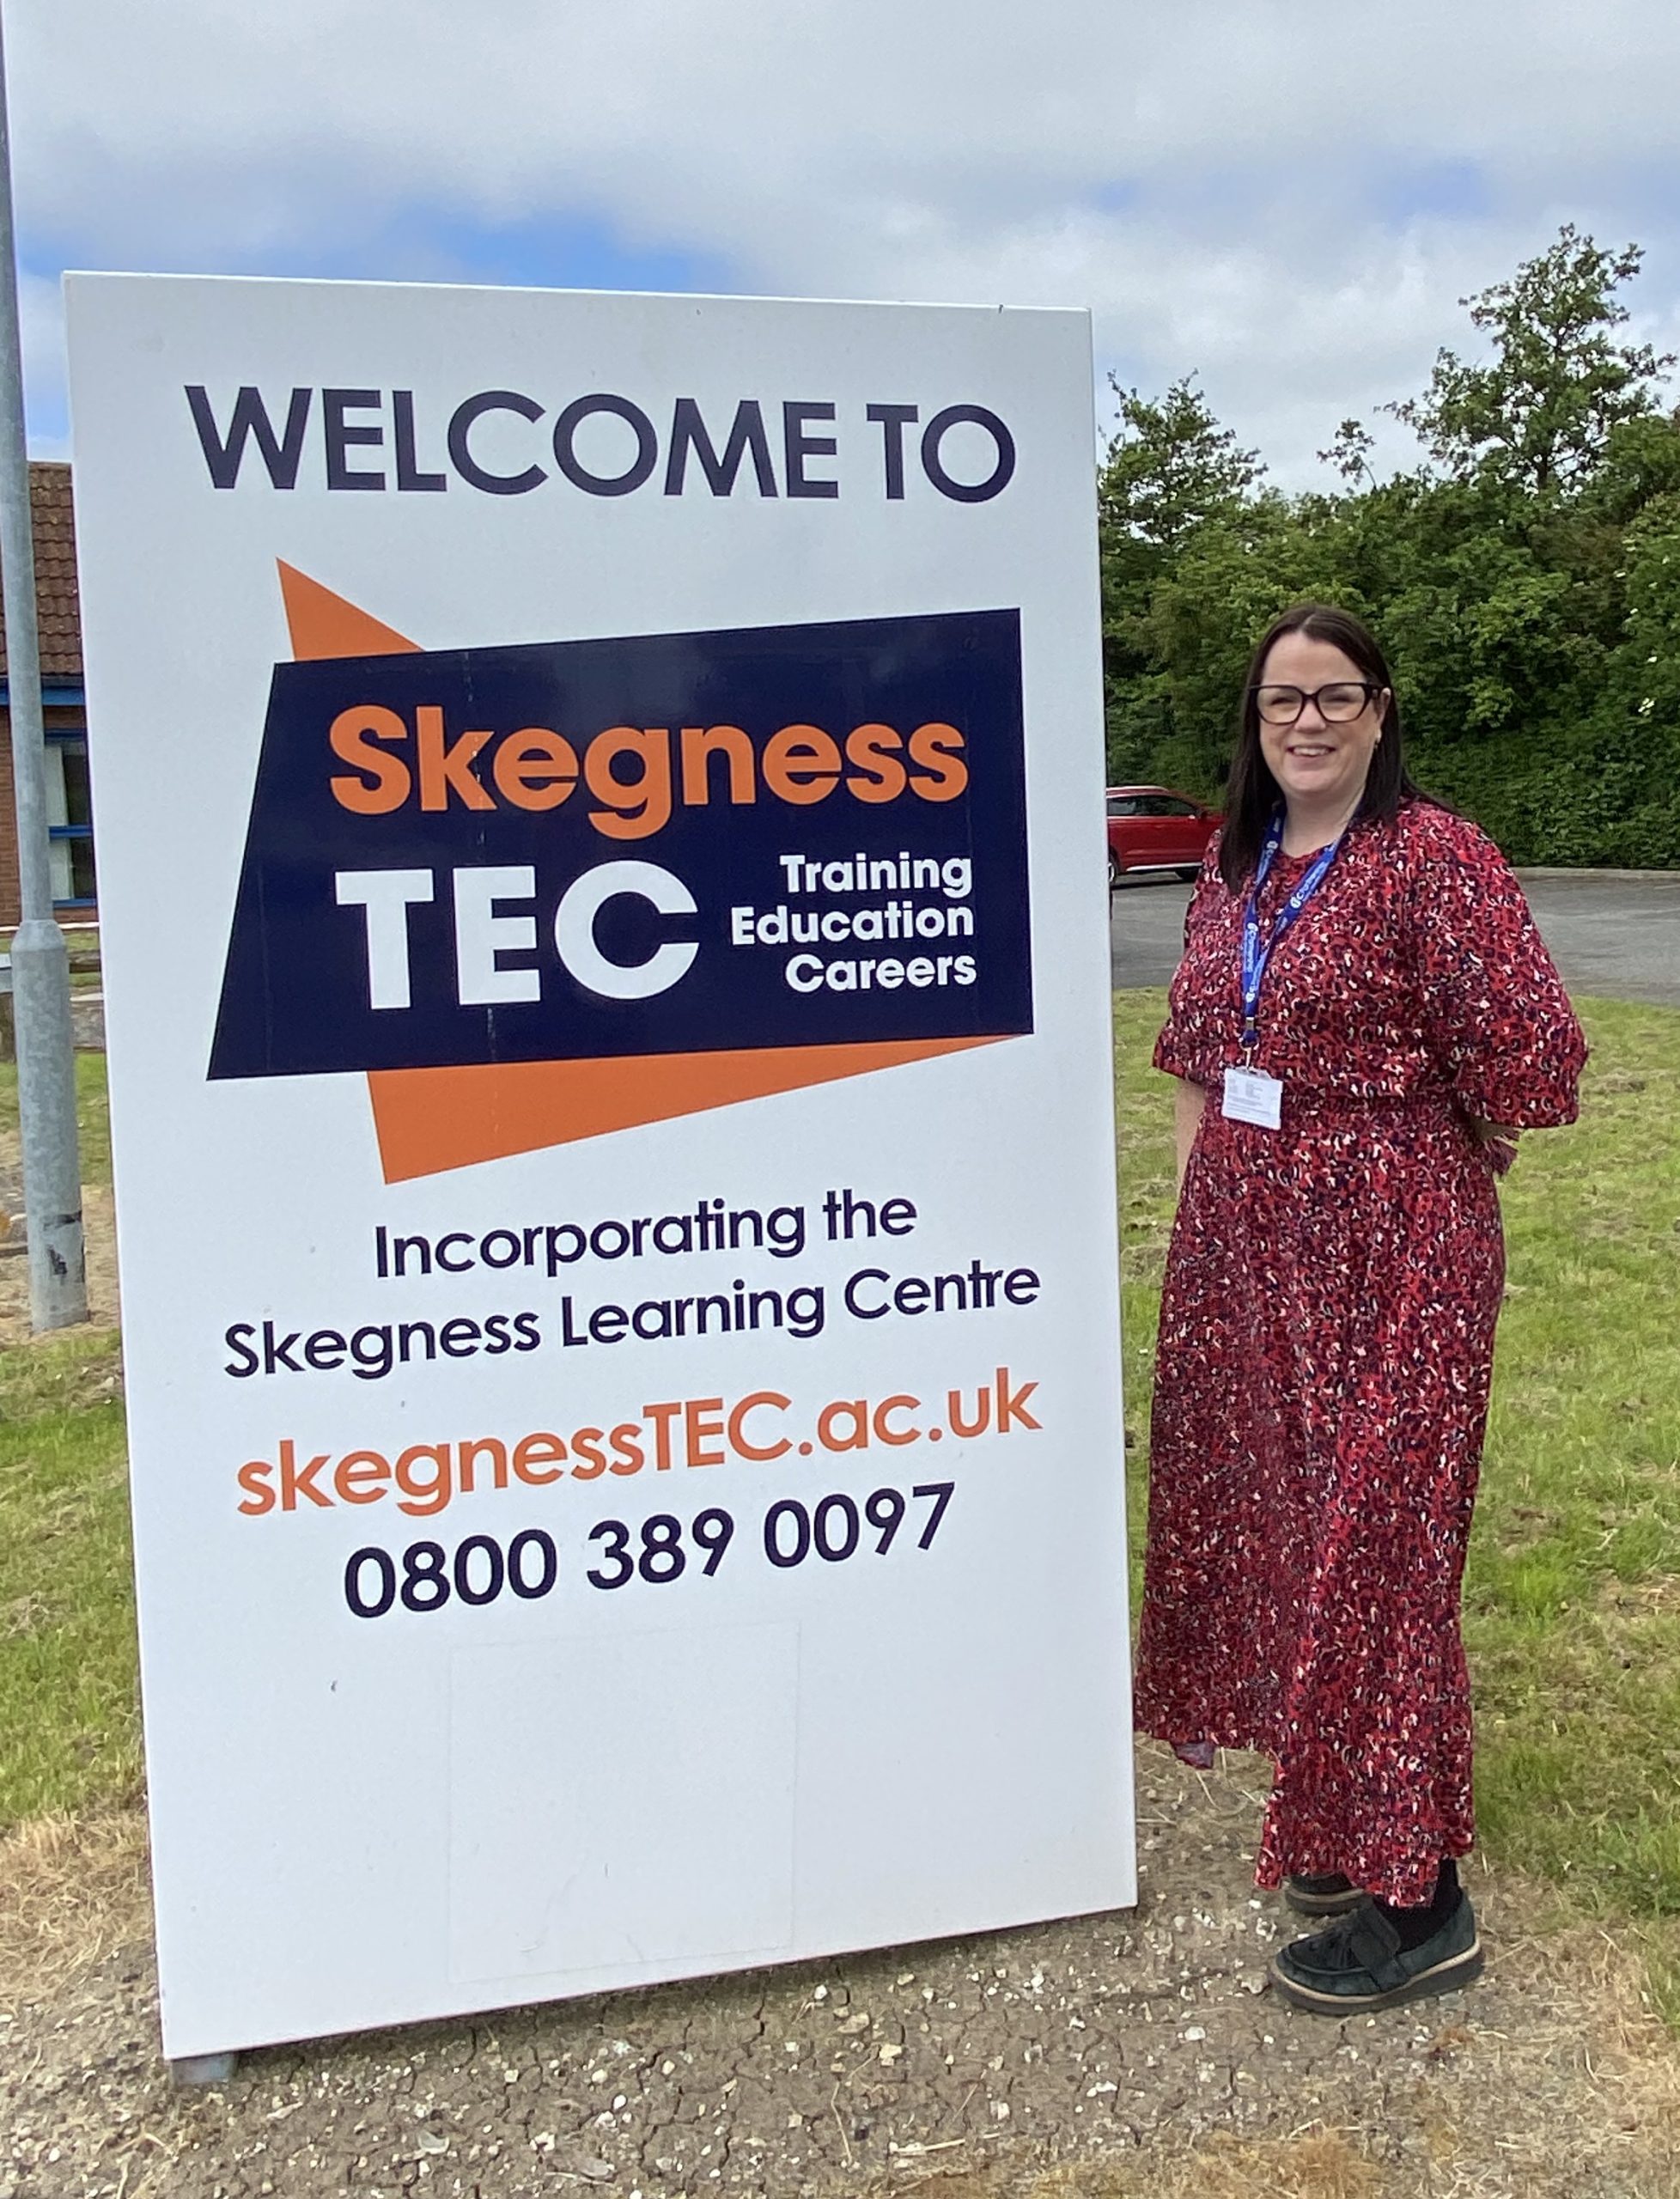 Exciting New Appointment of Campus Director at Skegness TEC